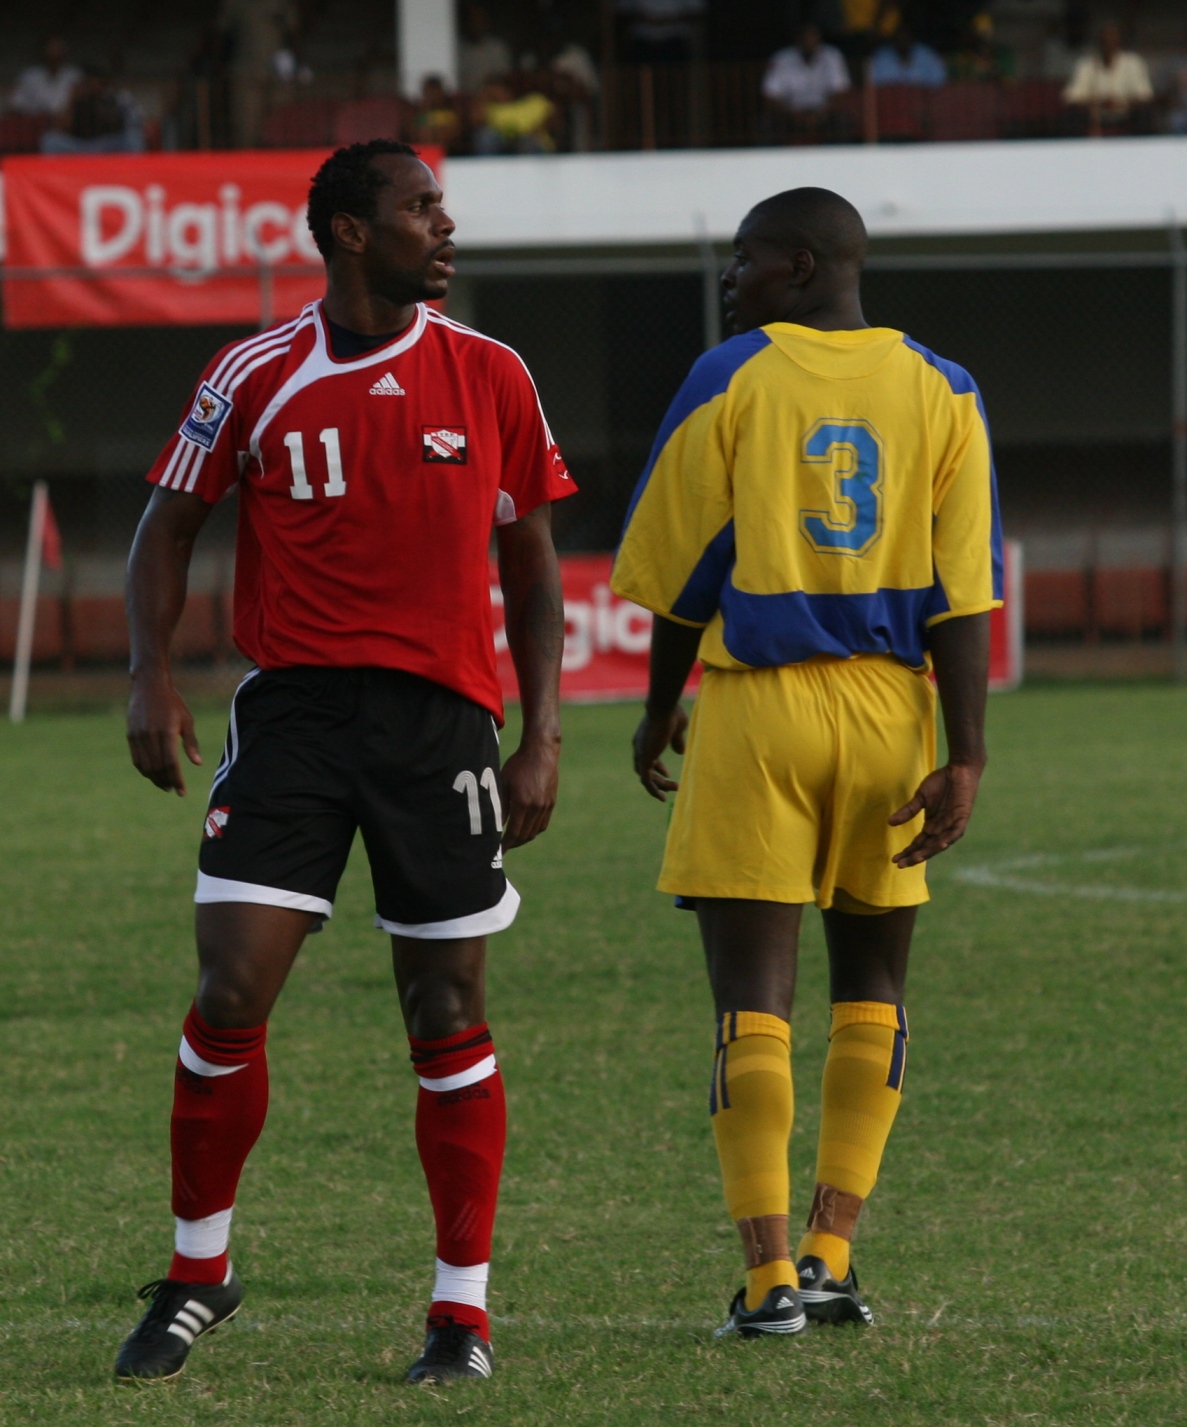 #11 Errol McFarlane saves the day for T&T.